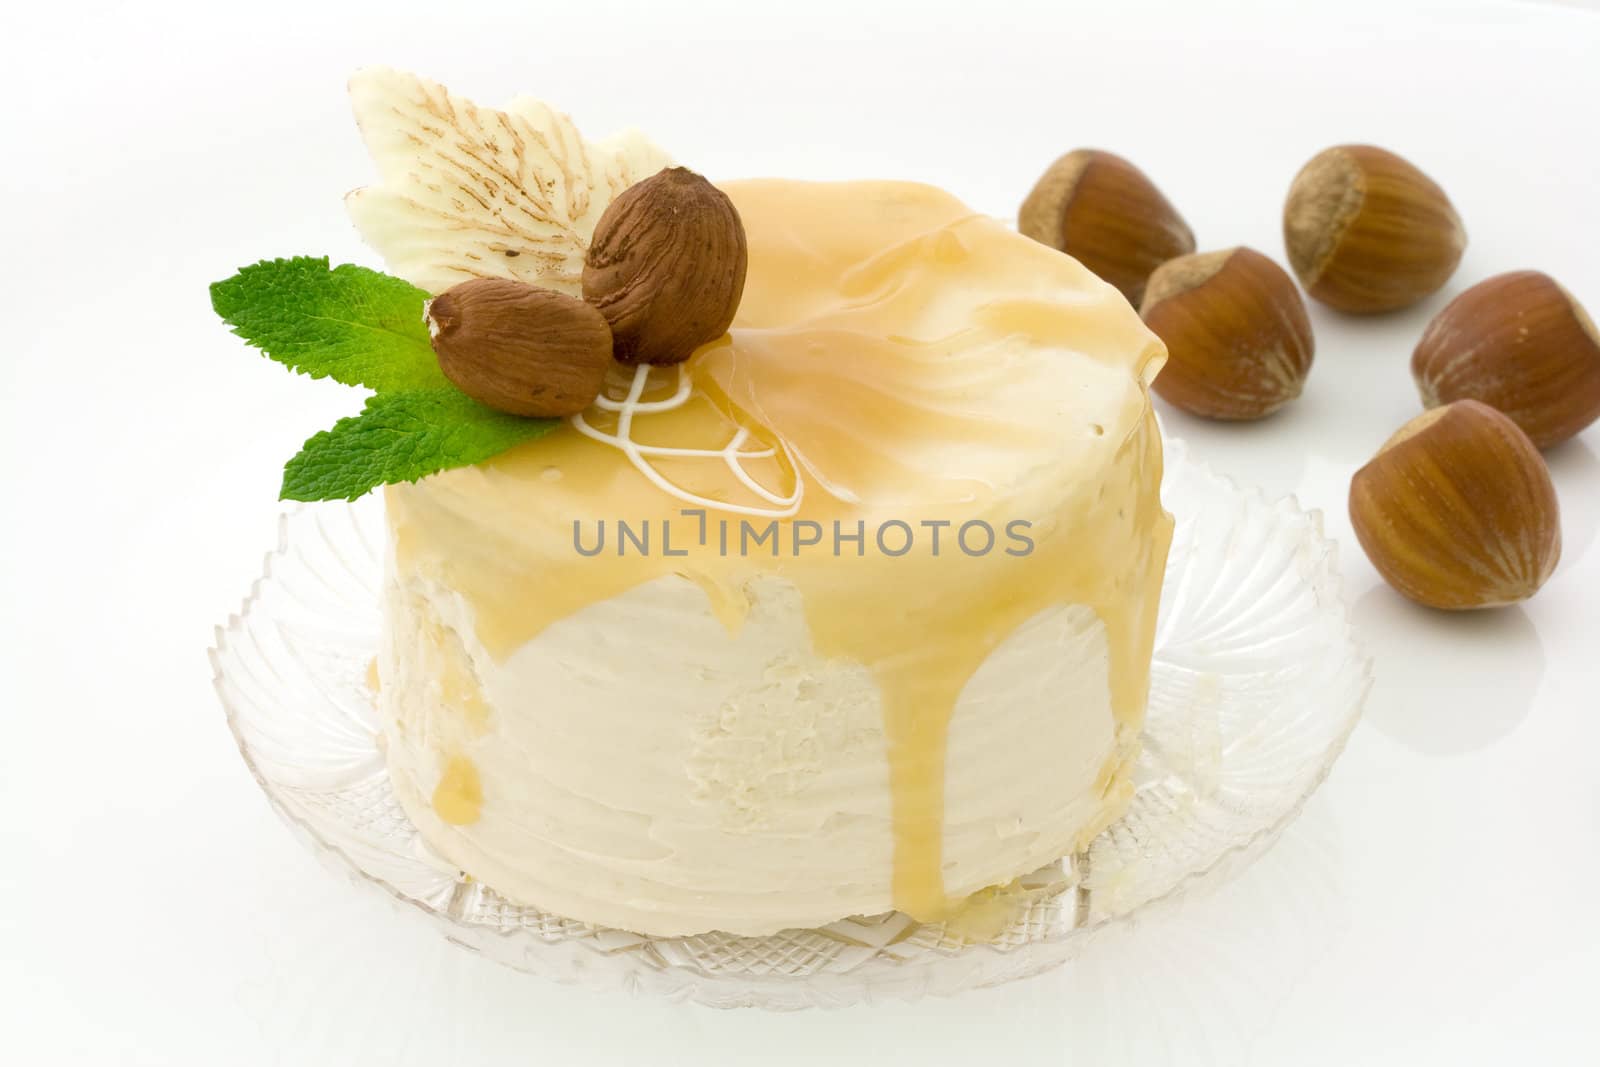 Hazelnut and maple syrup cake decorated with fruits on a transparent plate